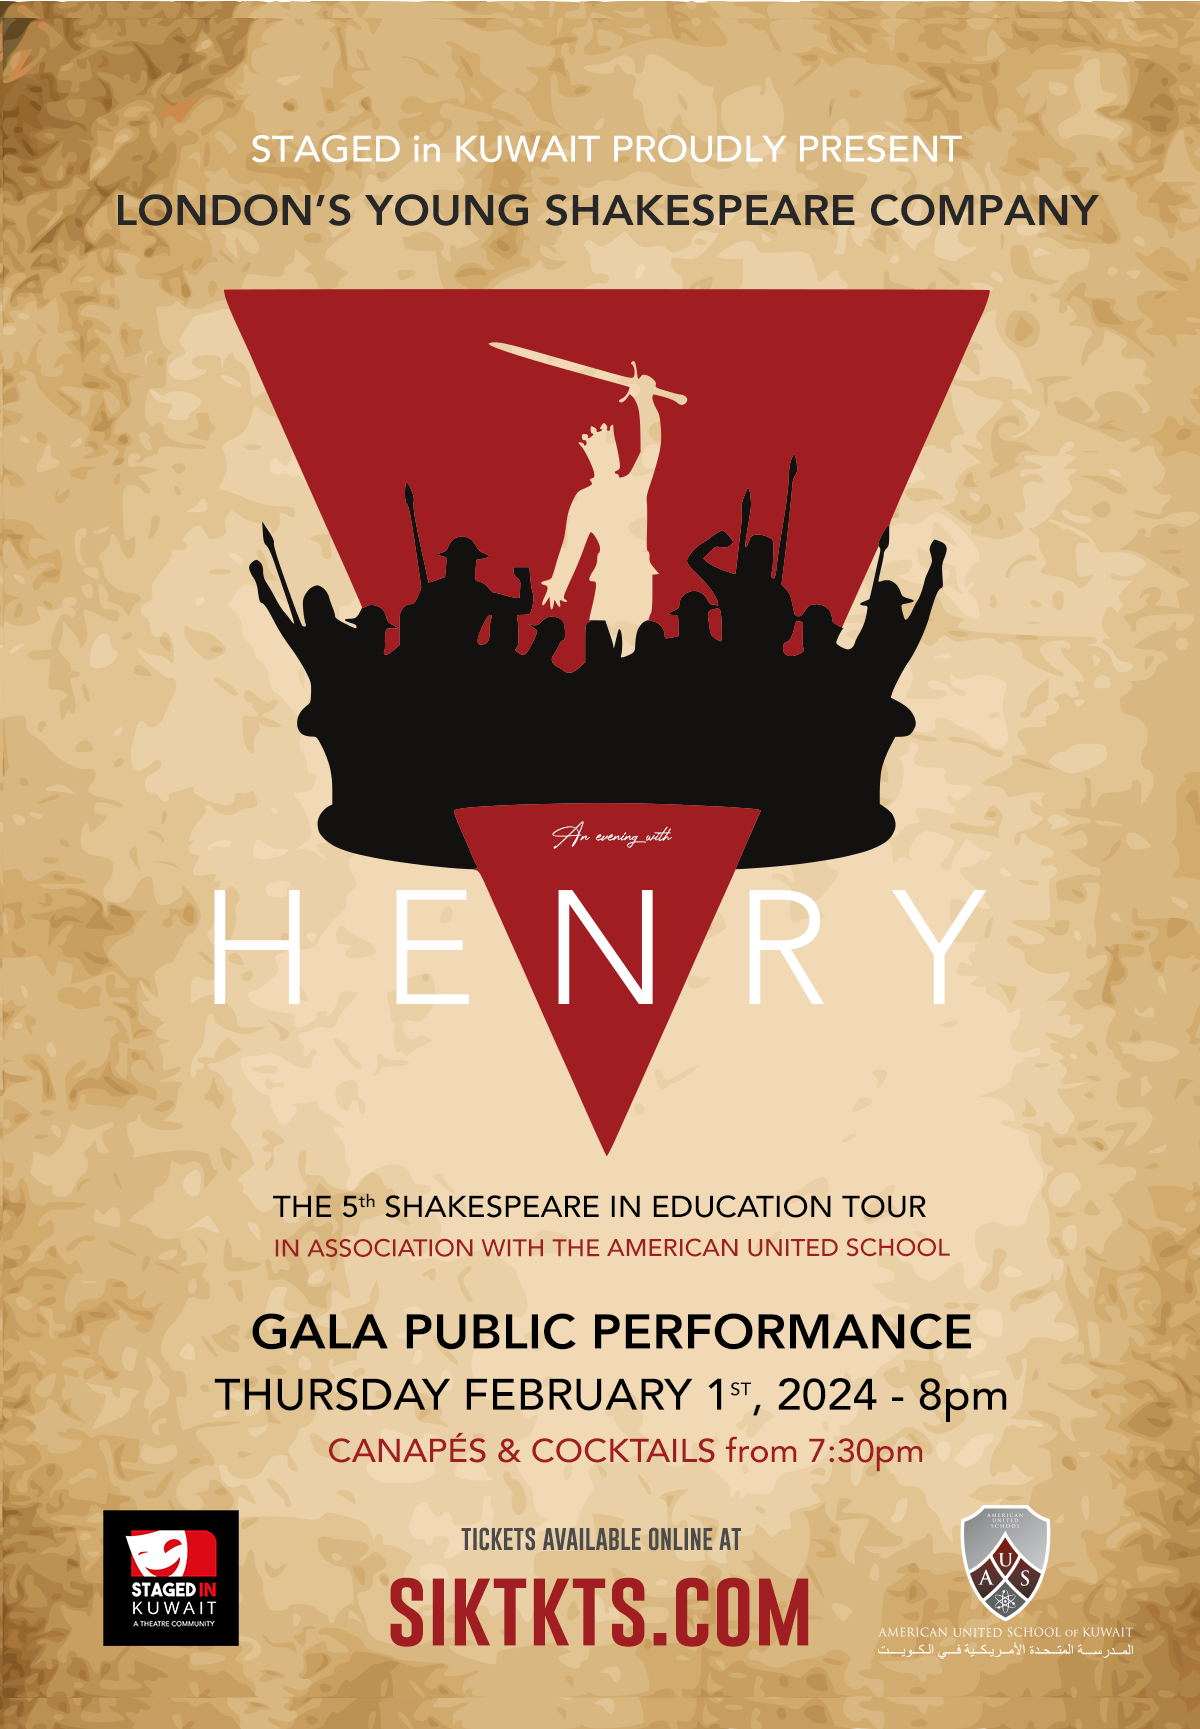 Book Now for An Evening with Henry V